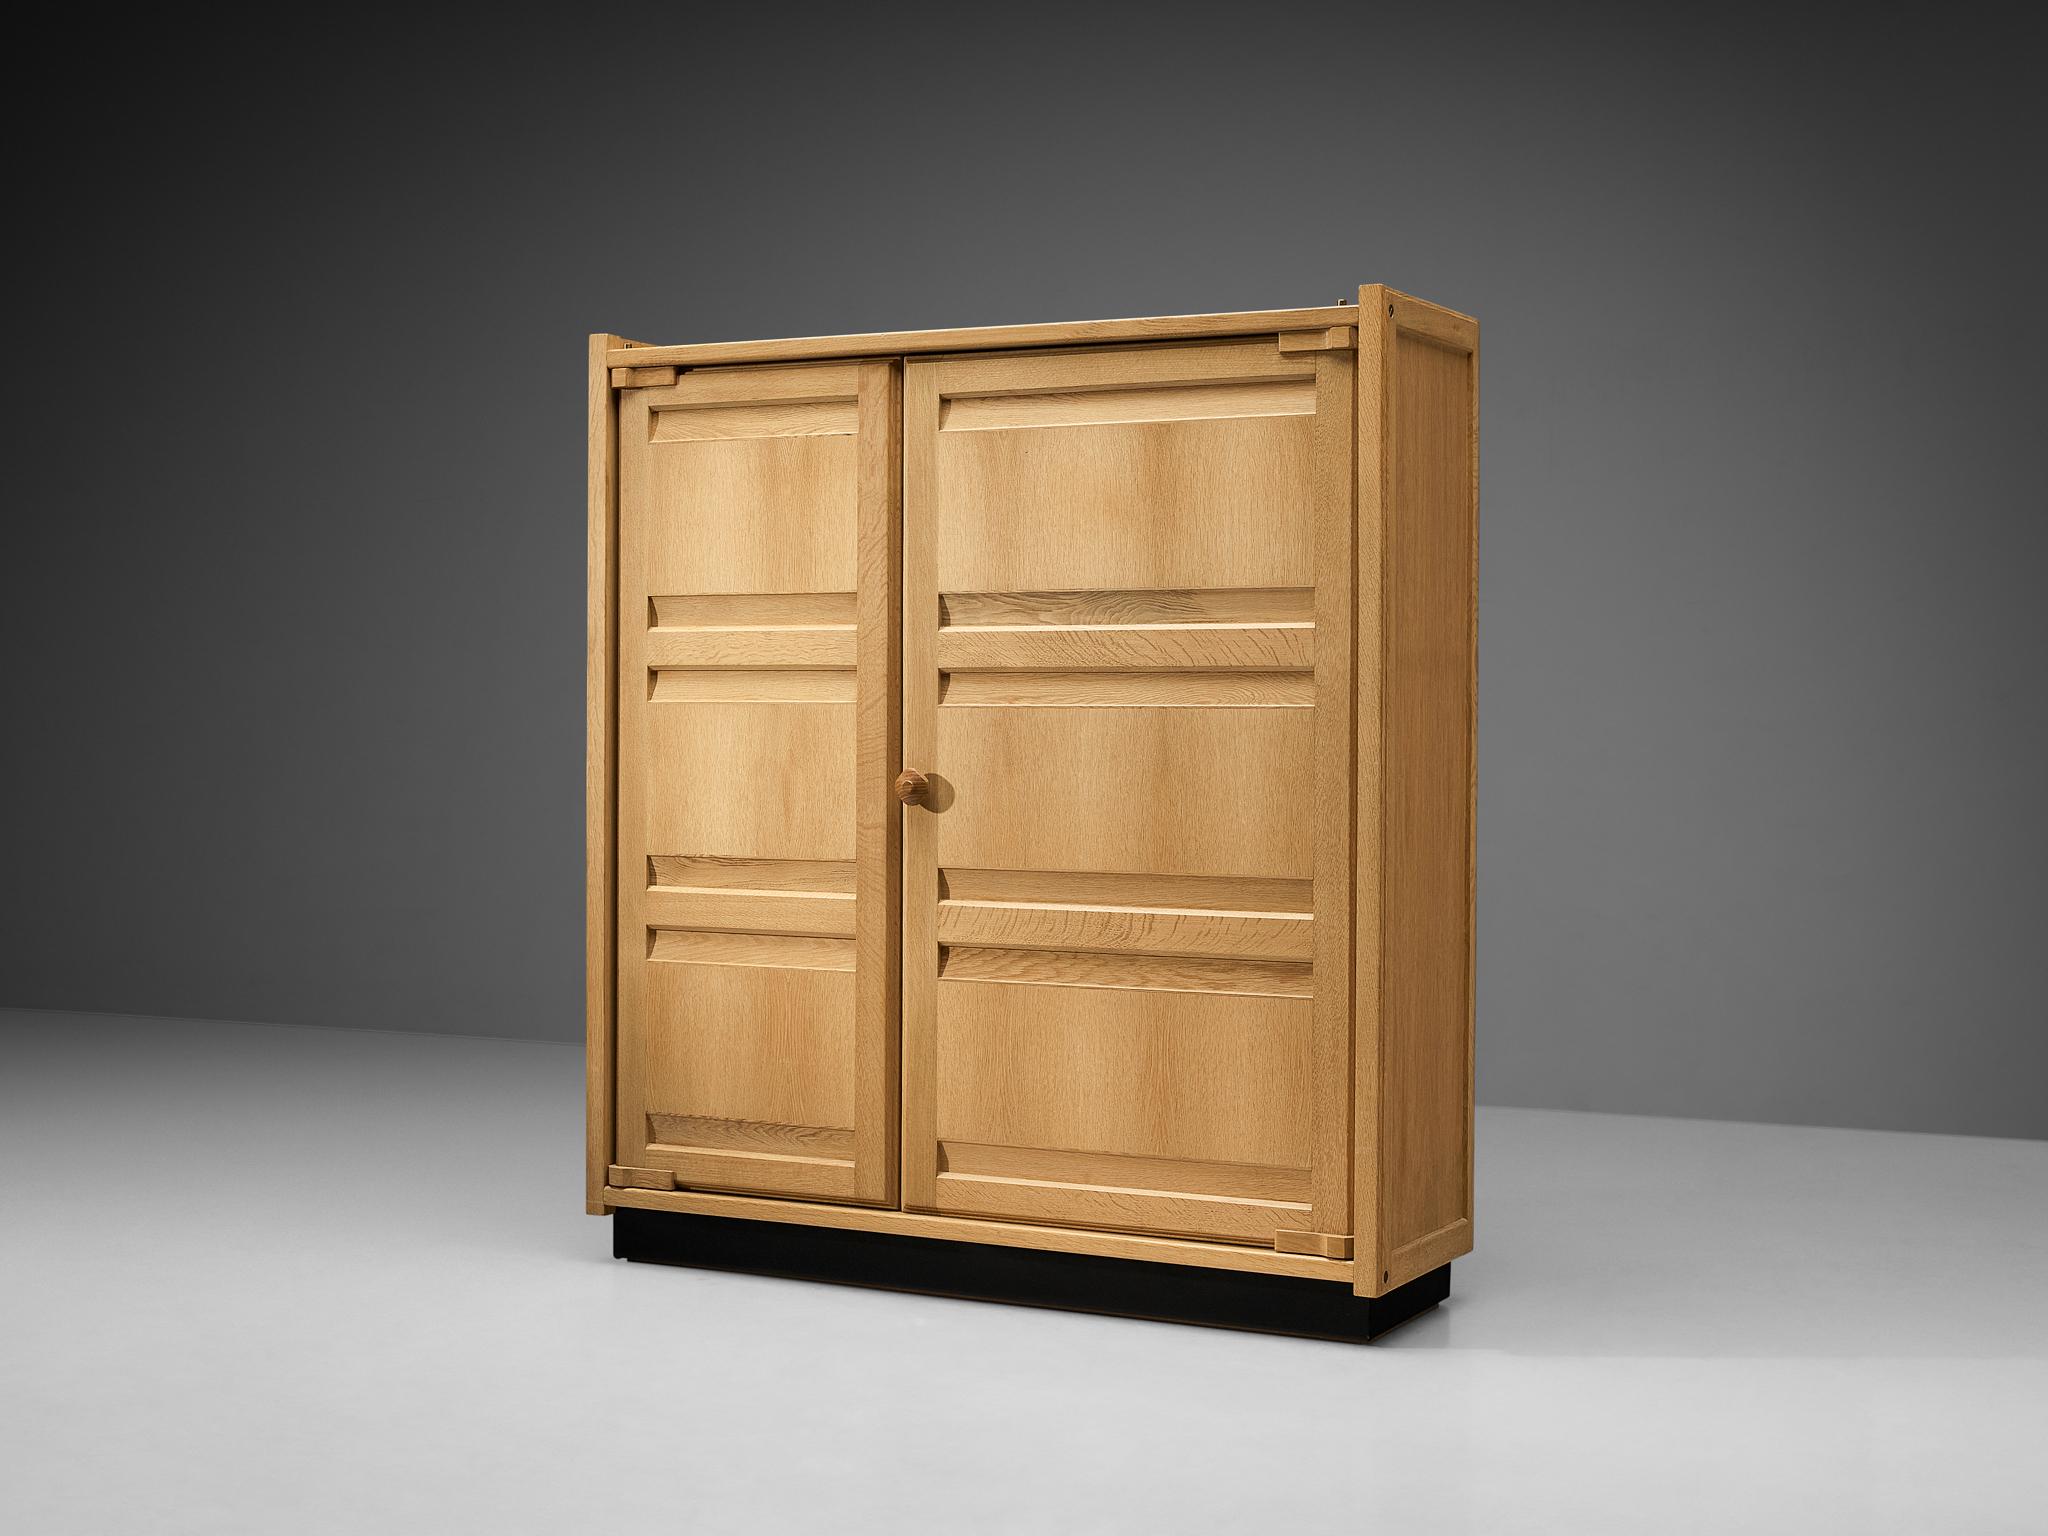 Guillerme et Chambron for Votre Maison, armoire or cabinet, oak, France, 1960s. 

This wardrobe is a good example of excellent woodworking by virtue of the well-designed construction based on innovative wood joints and geometric shapes that create a